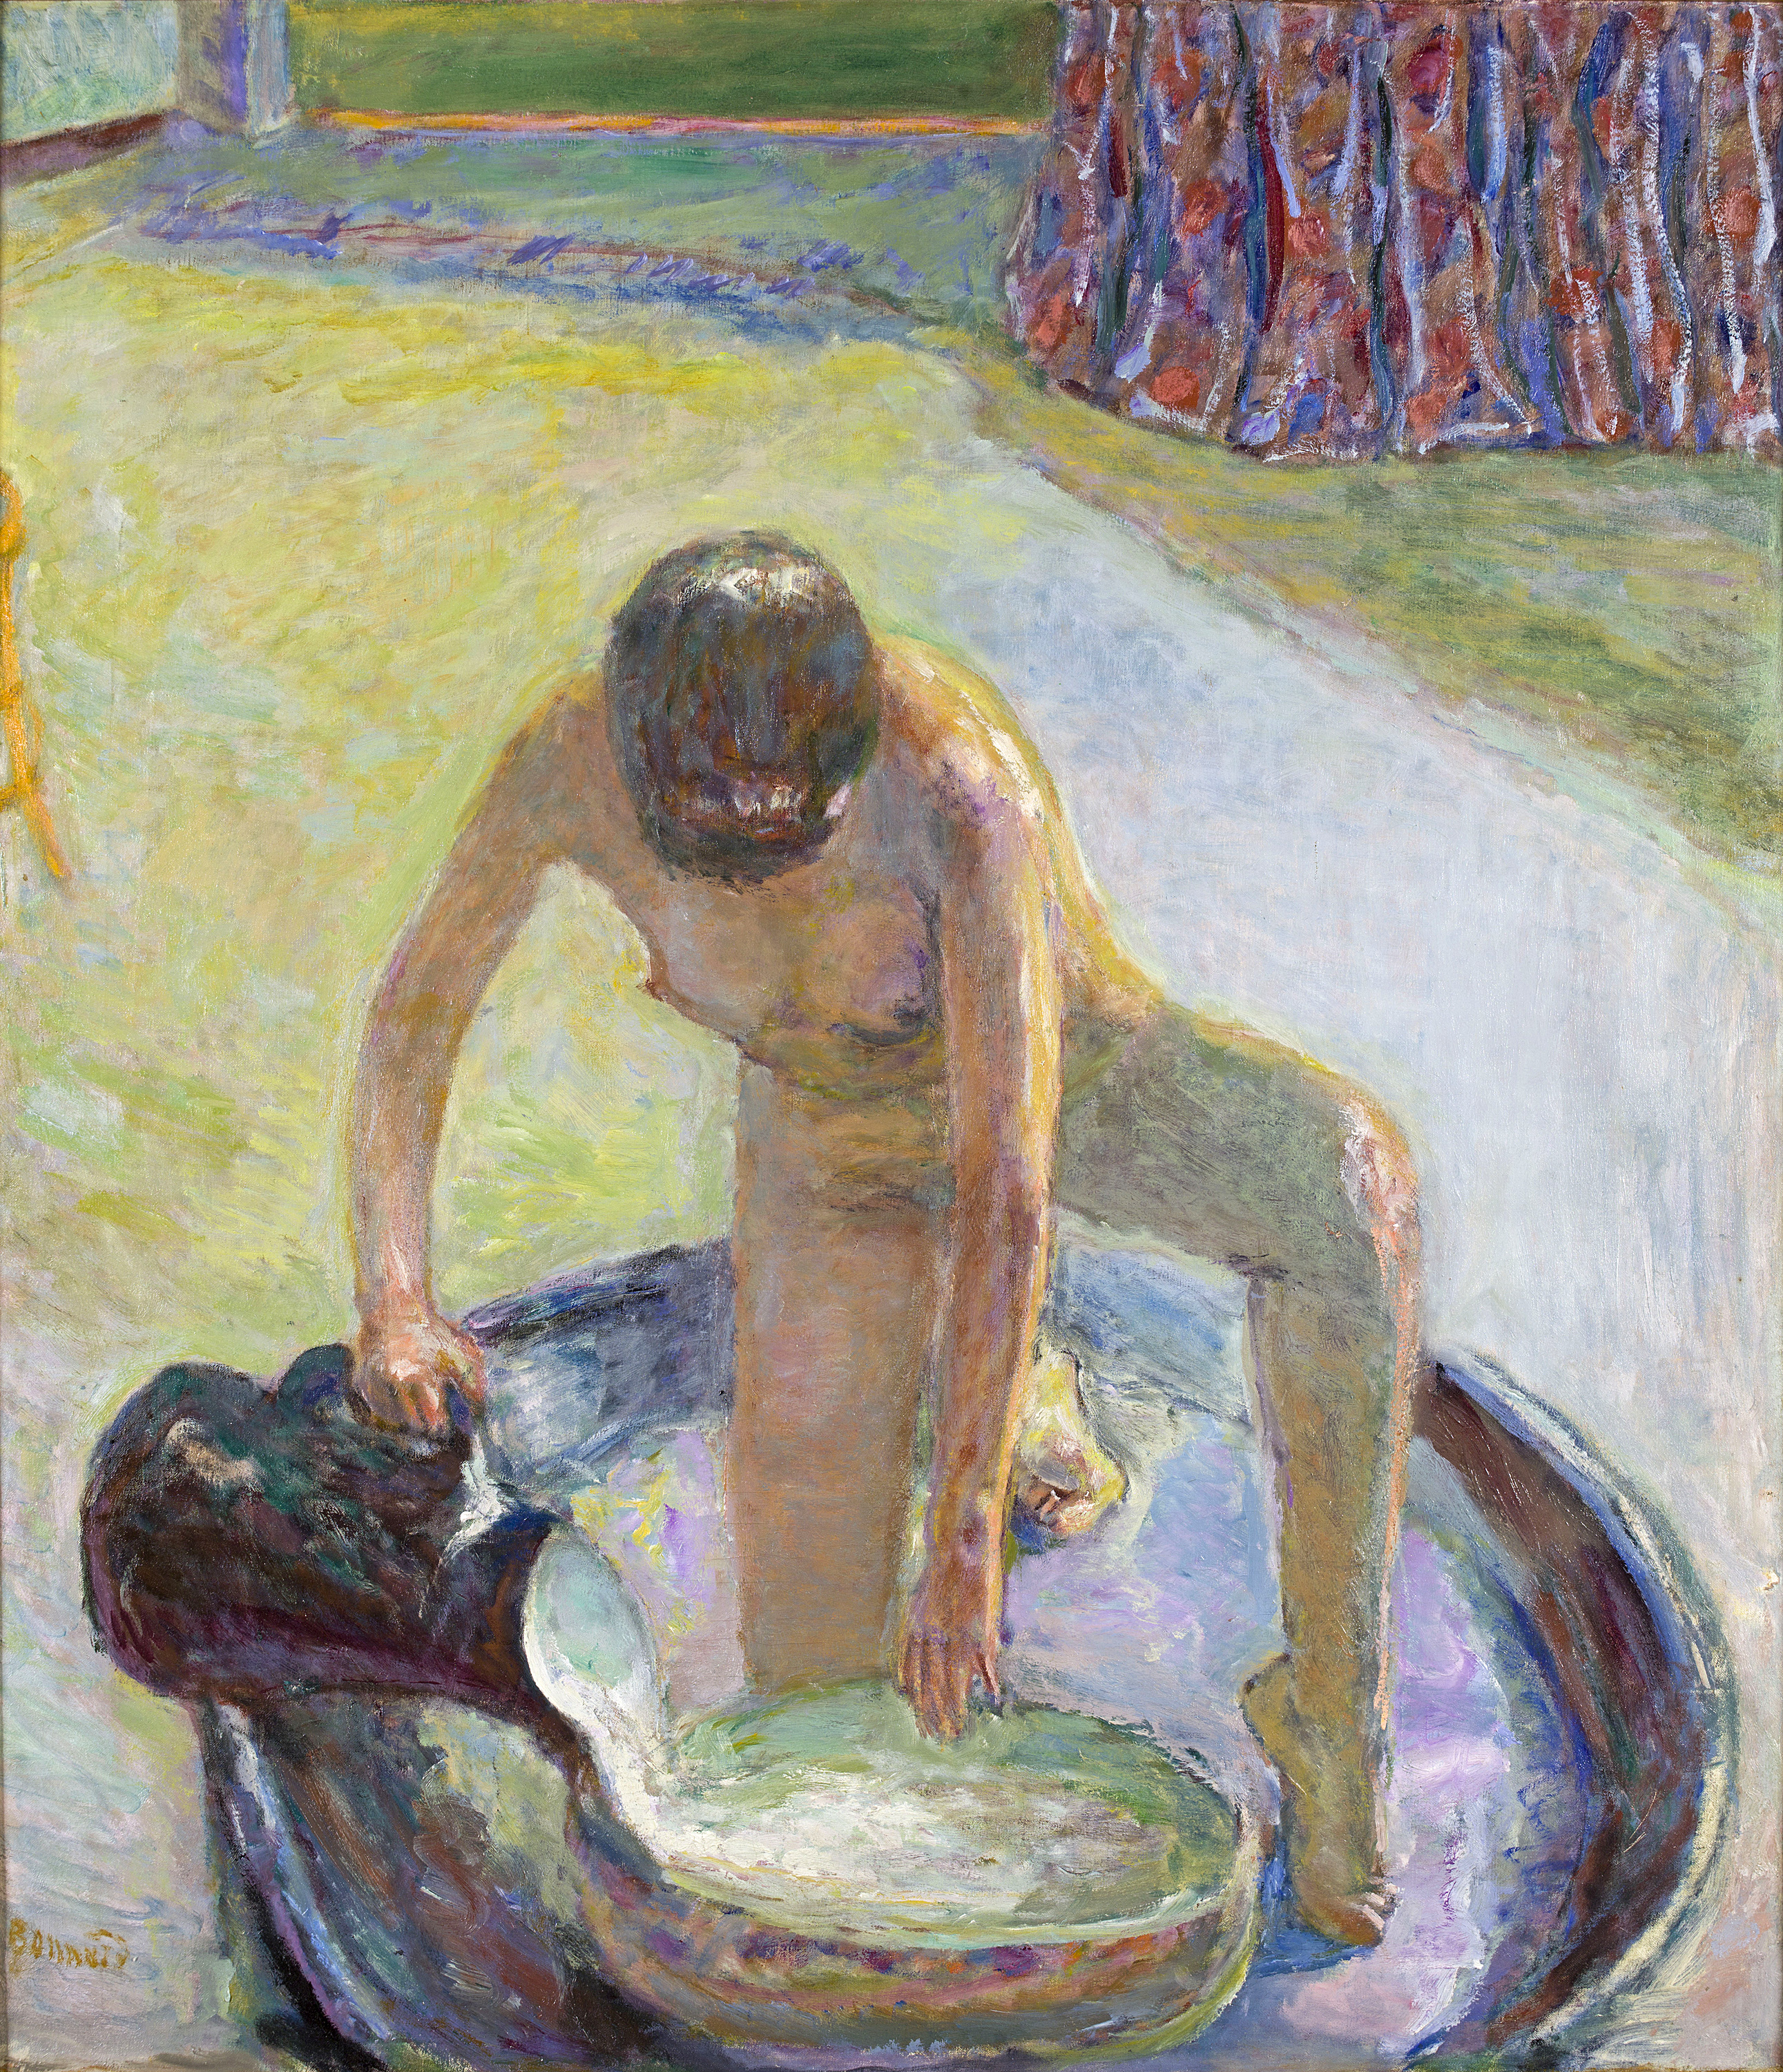 An oil painting of a naked woman getting out of a blue bathtub.